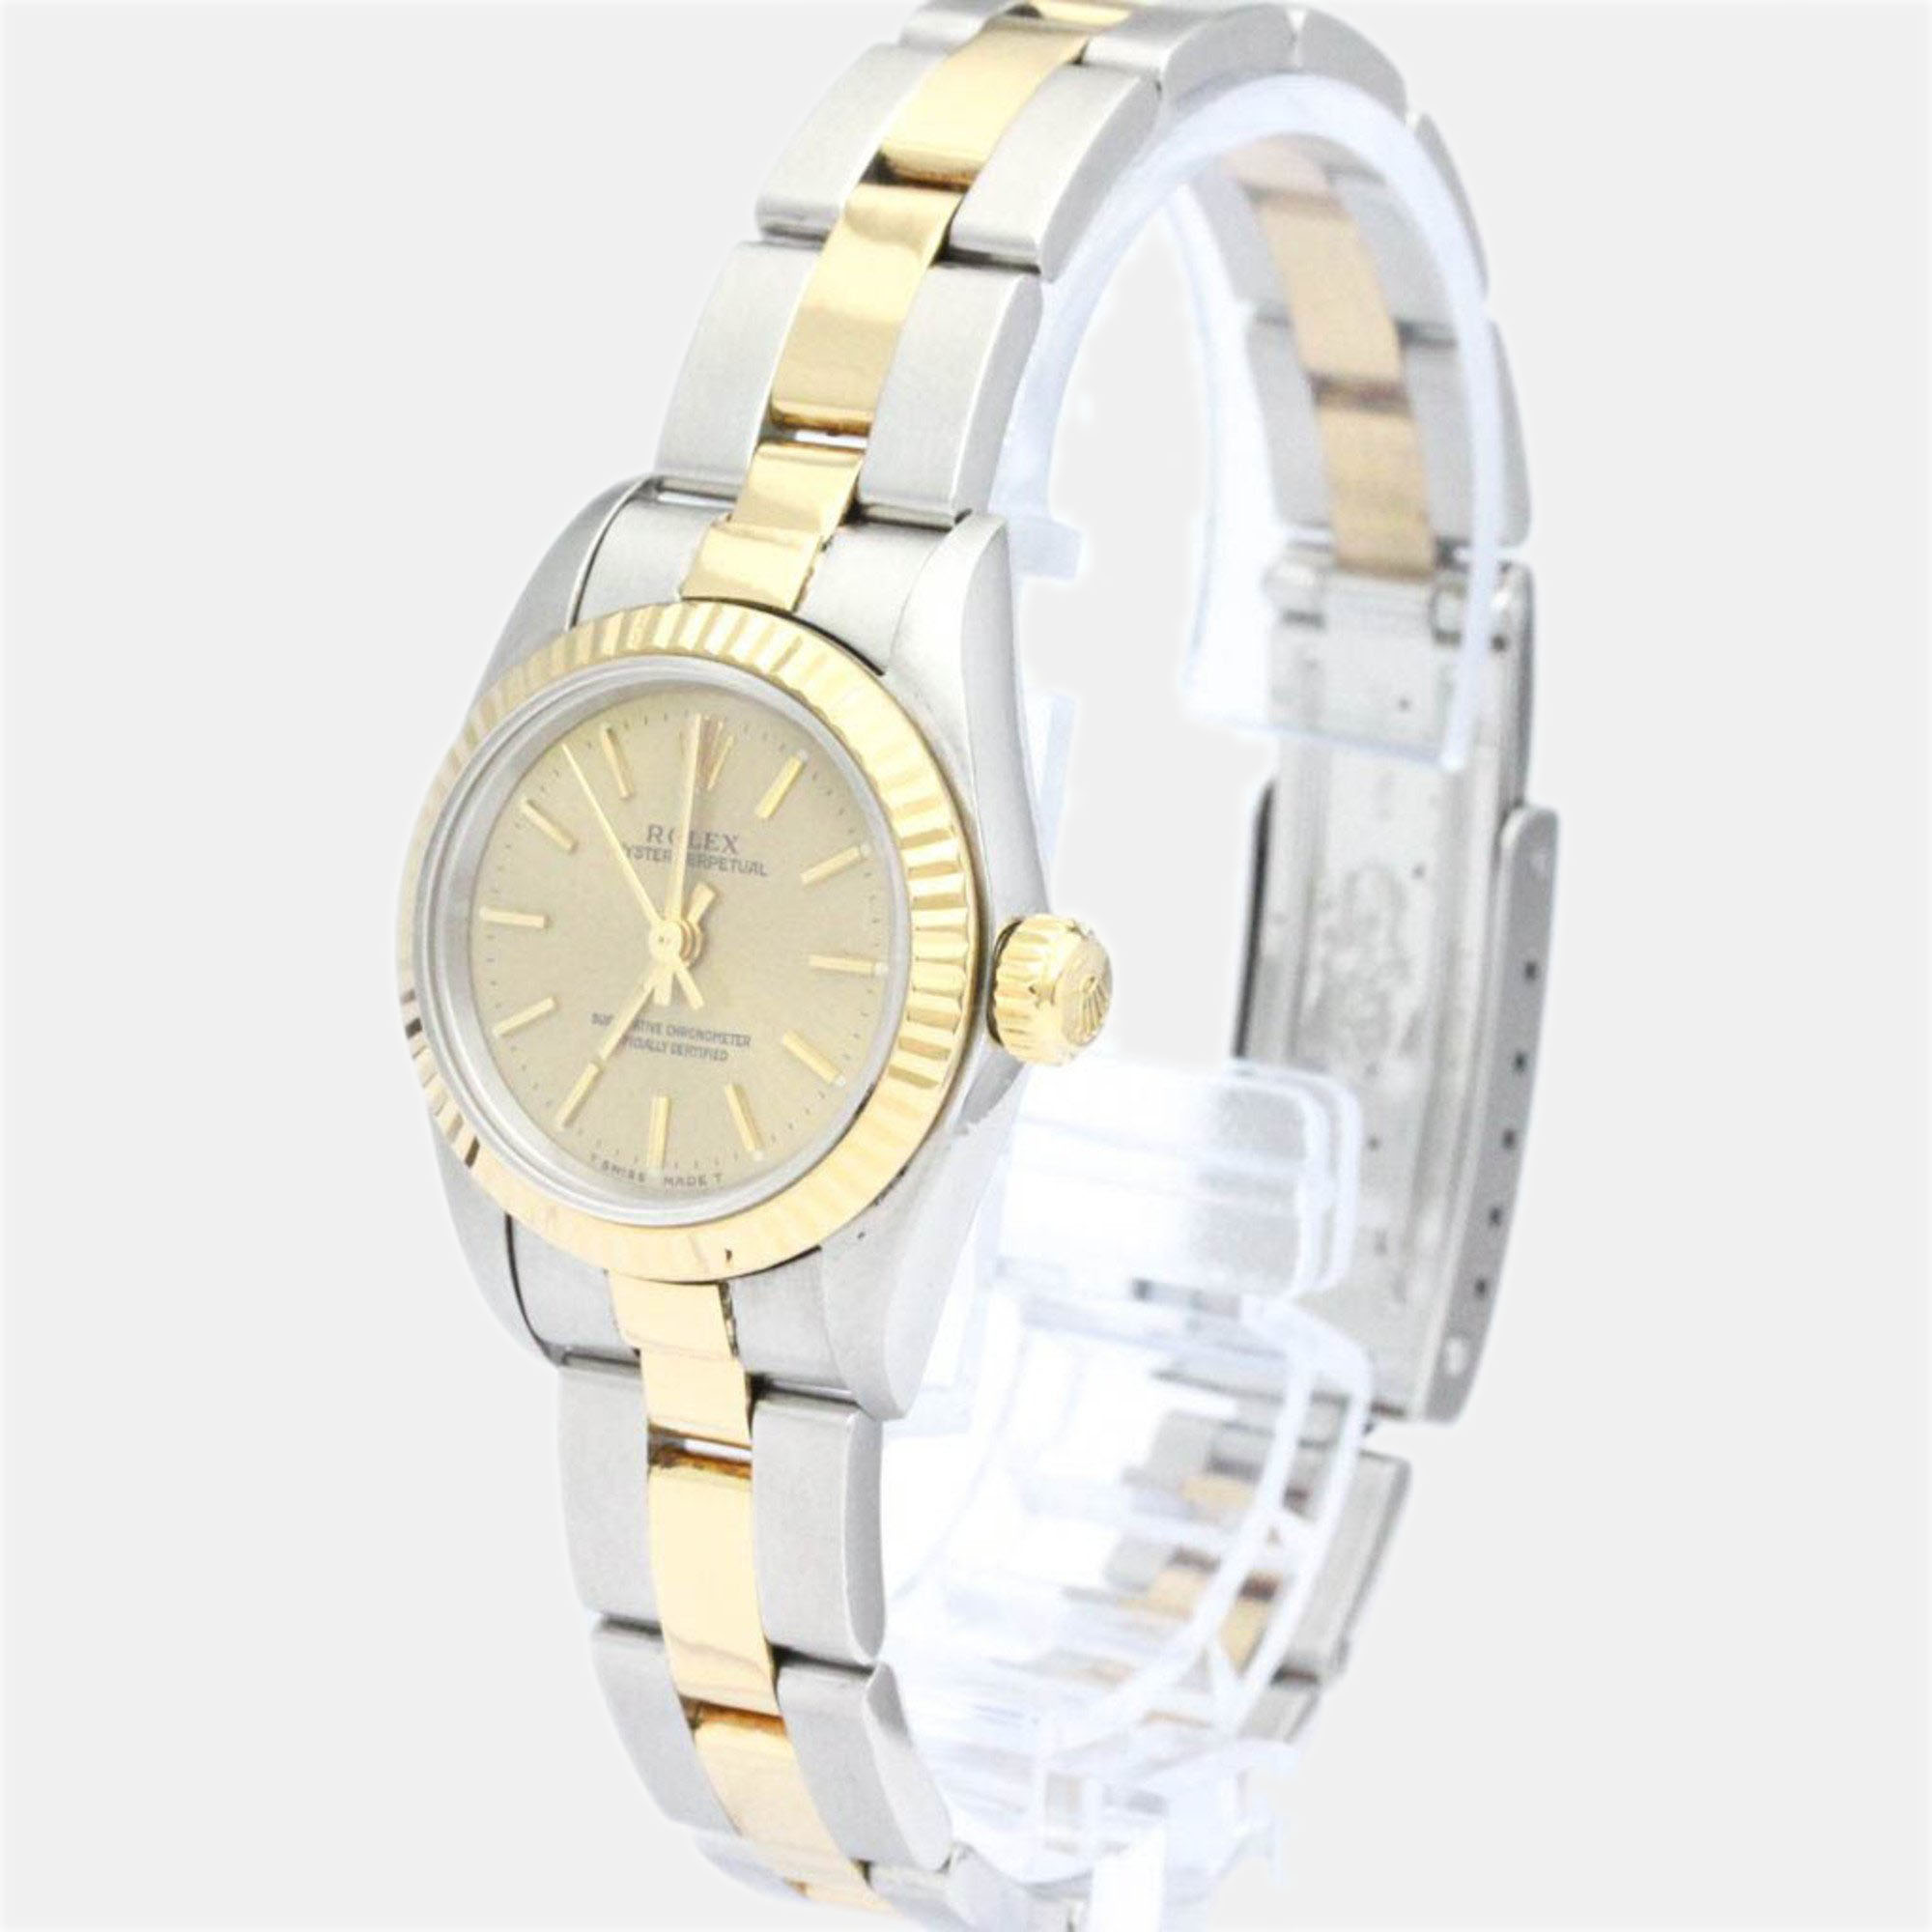 

Rolex Champagne 18k Yellow Gold And Stainless Steel Oyster Perpetual 67193 Automatic Women's Wristwatch 24 mm